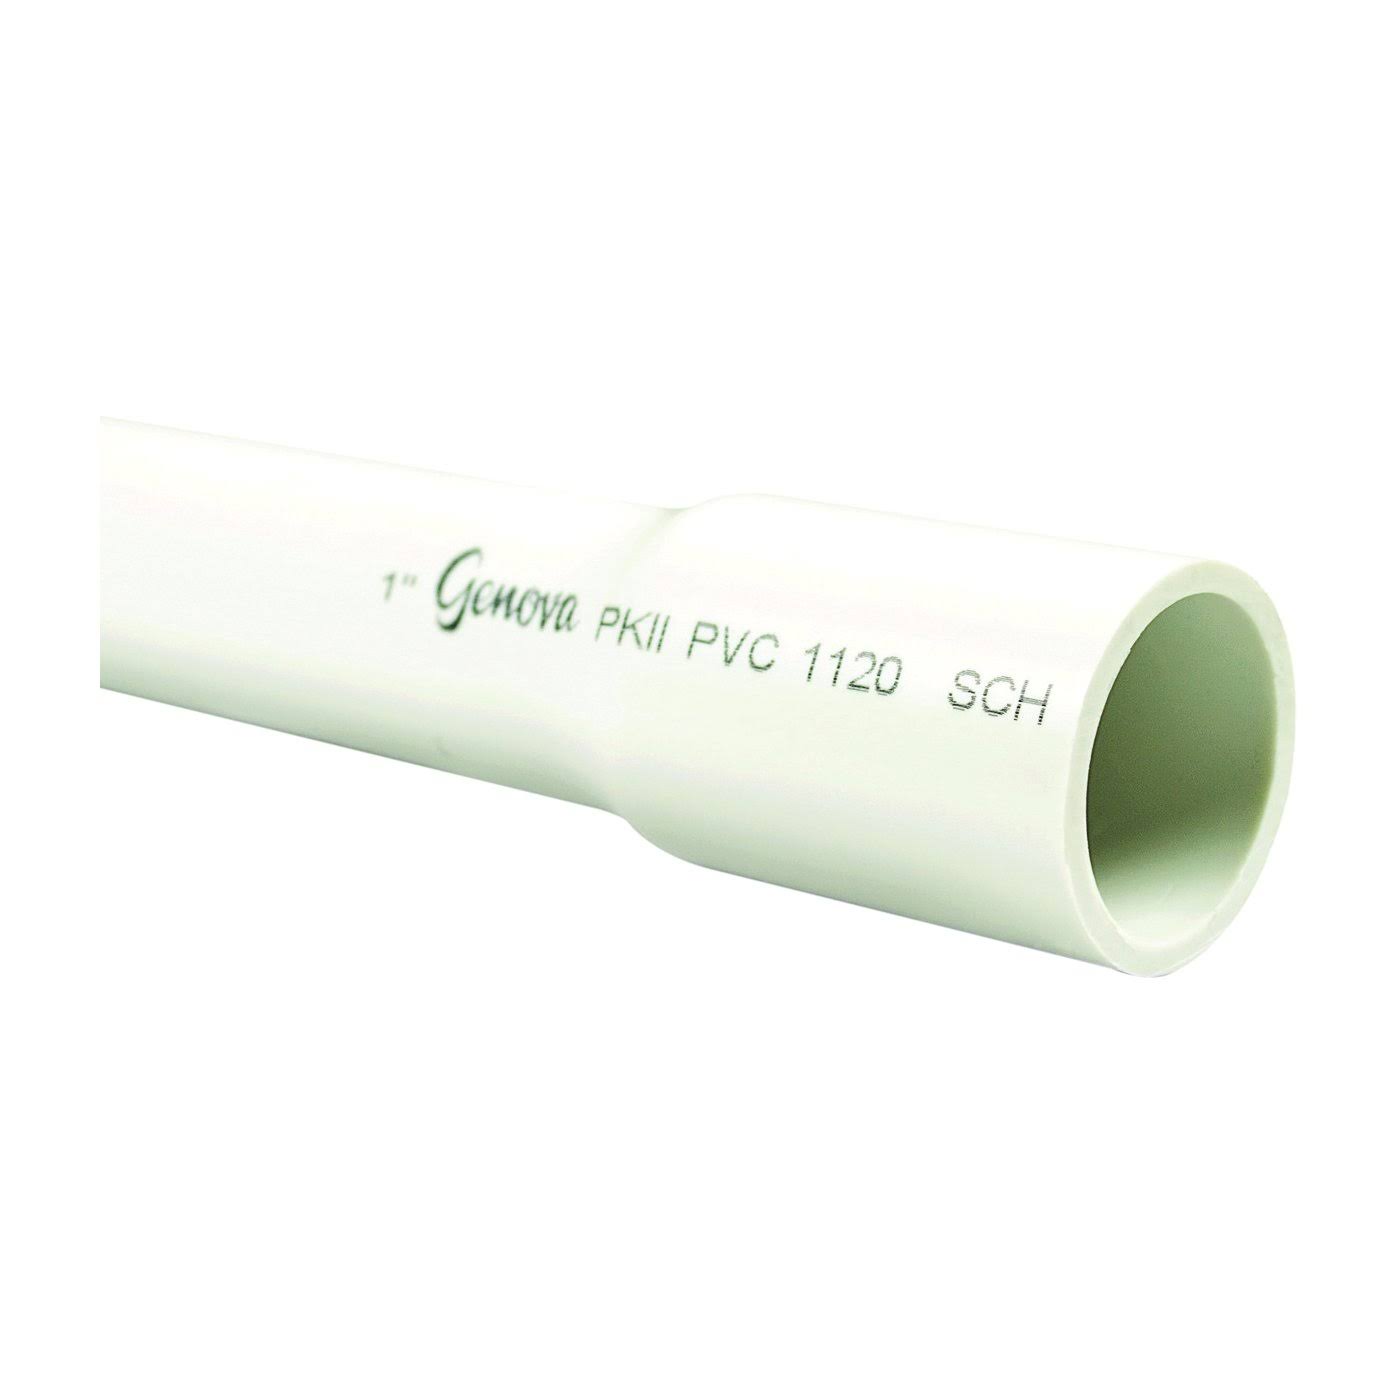 Genova Products 300107 1 in. x 20 ft. PVC Belled End Schedule 40 Pressure Pipe - 20 ft